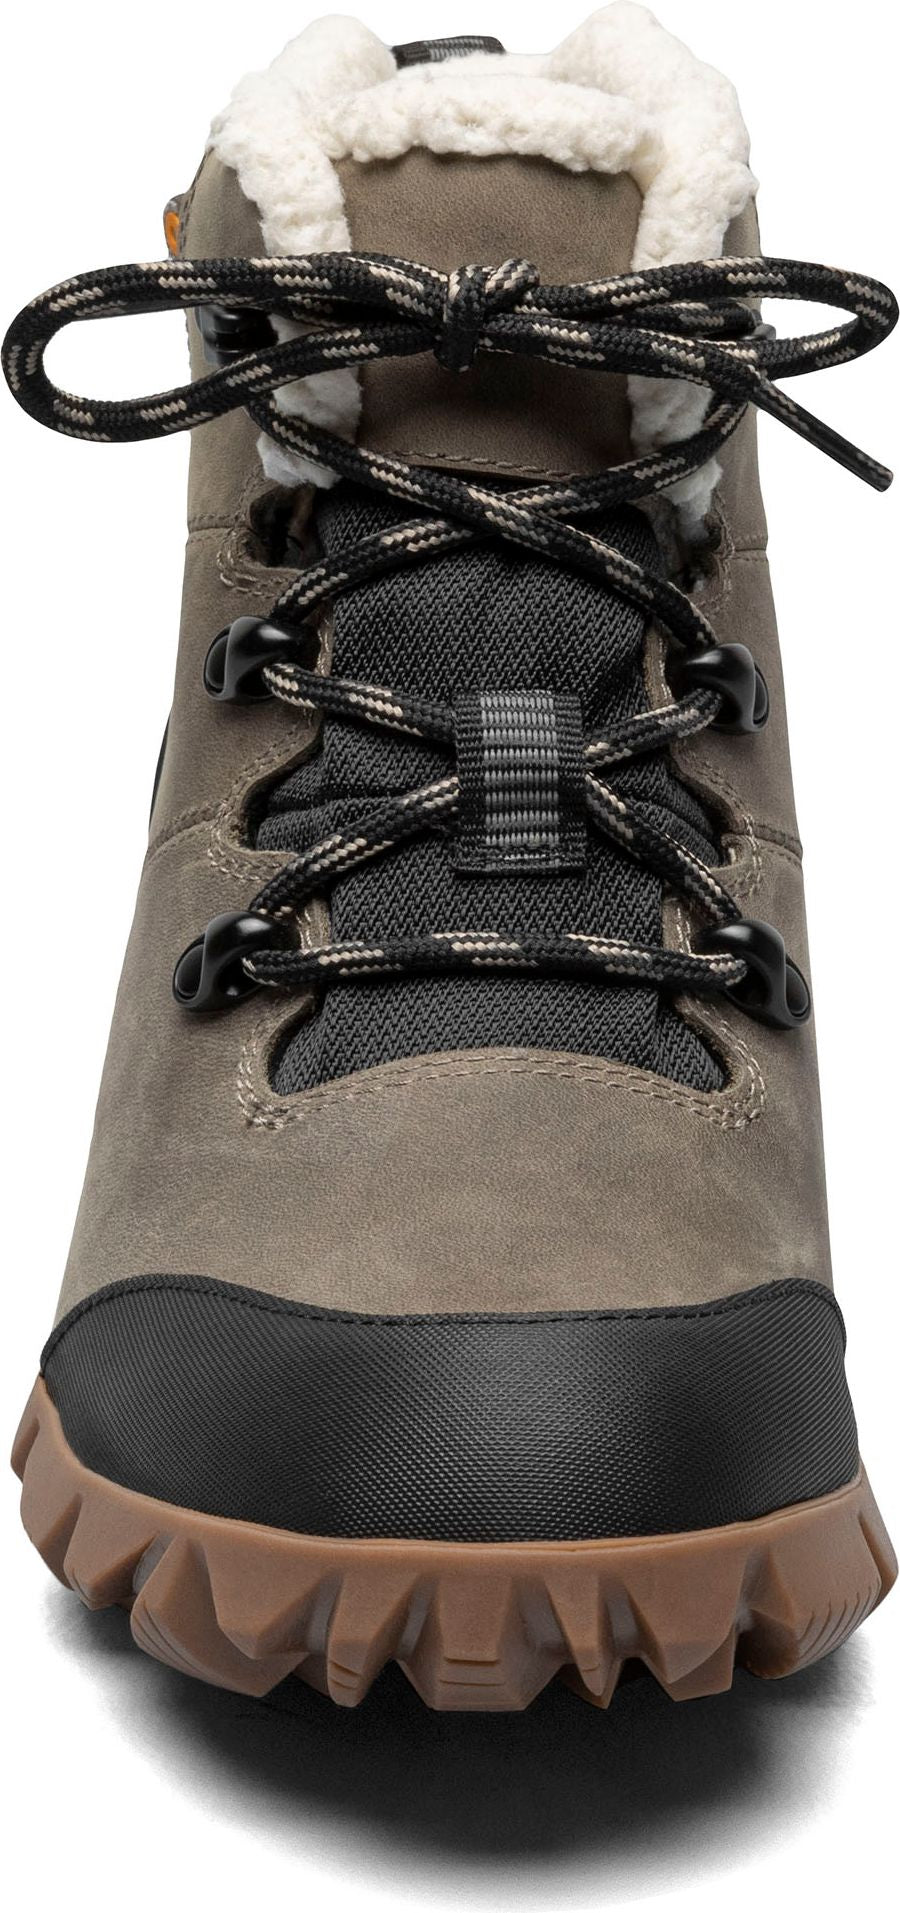 BOGS Boots Arcata Urban Leather Mid Taupe